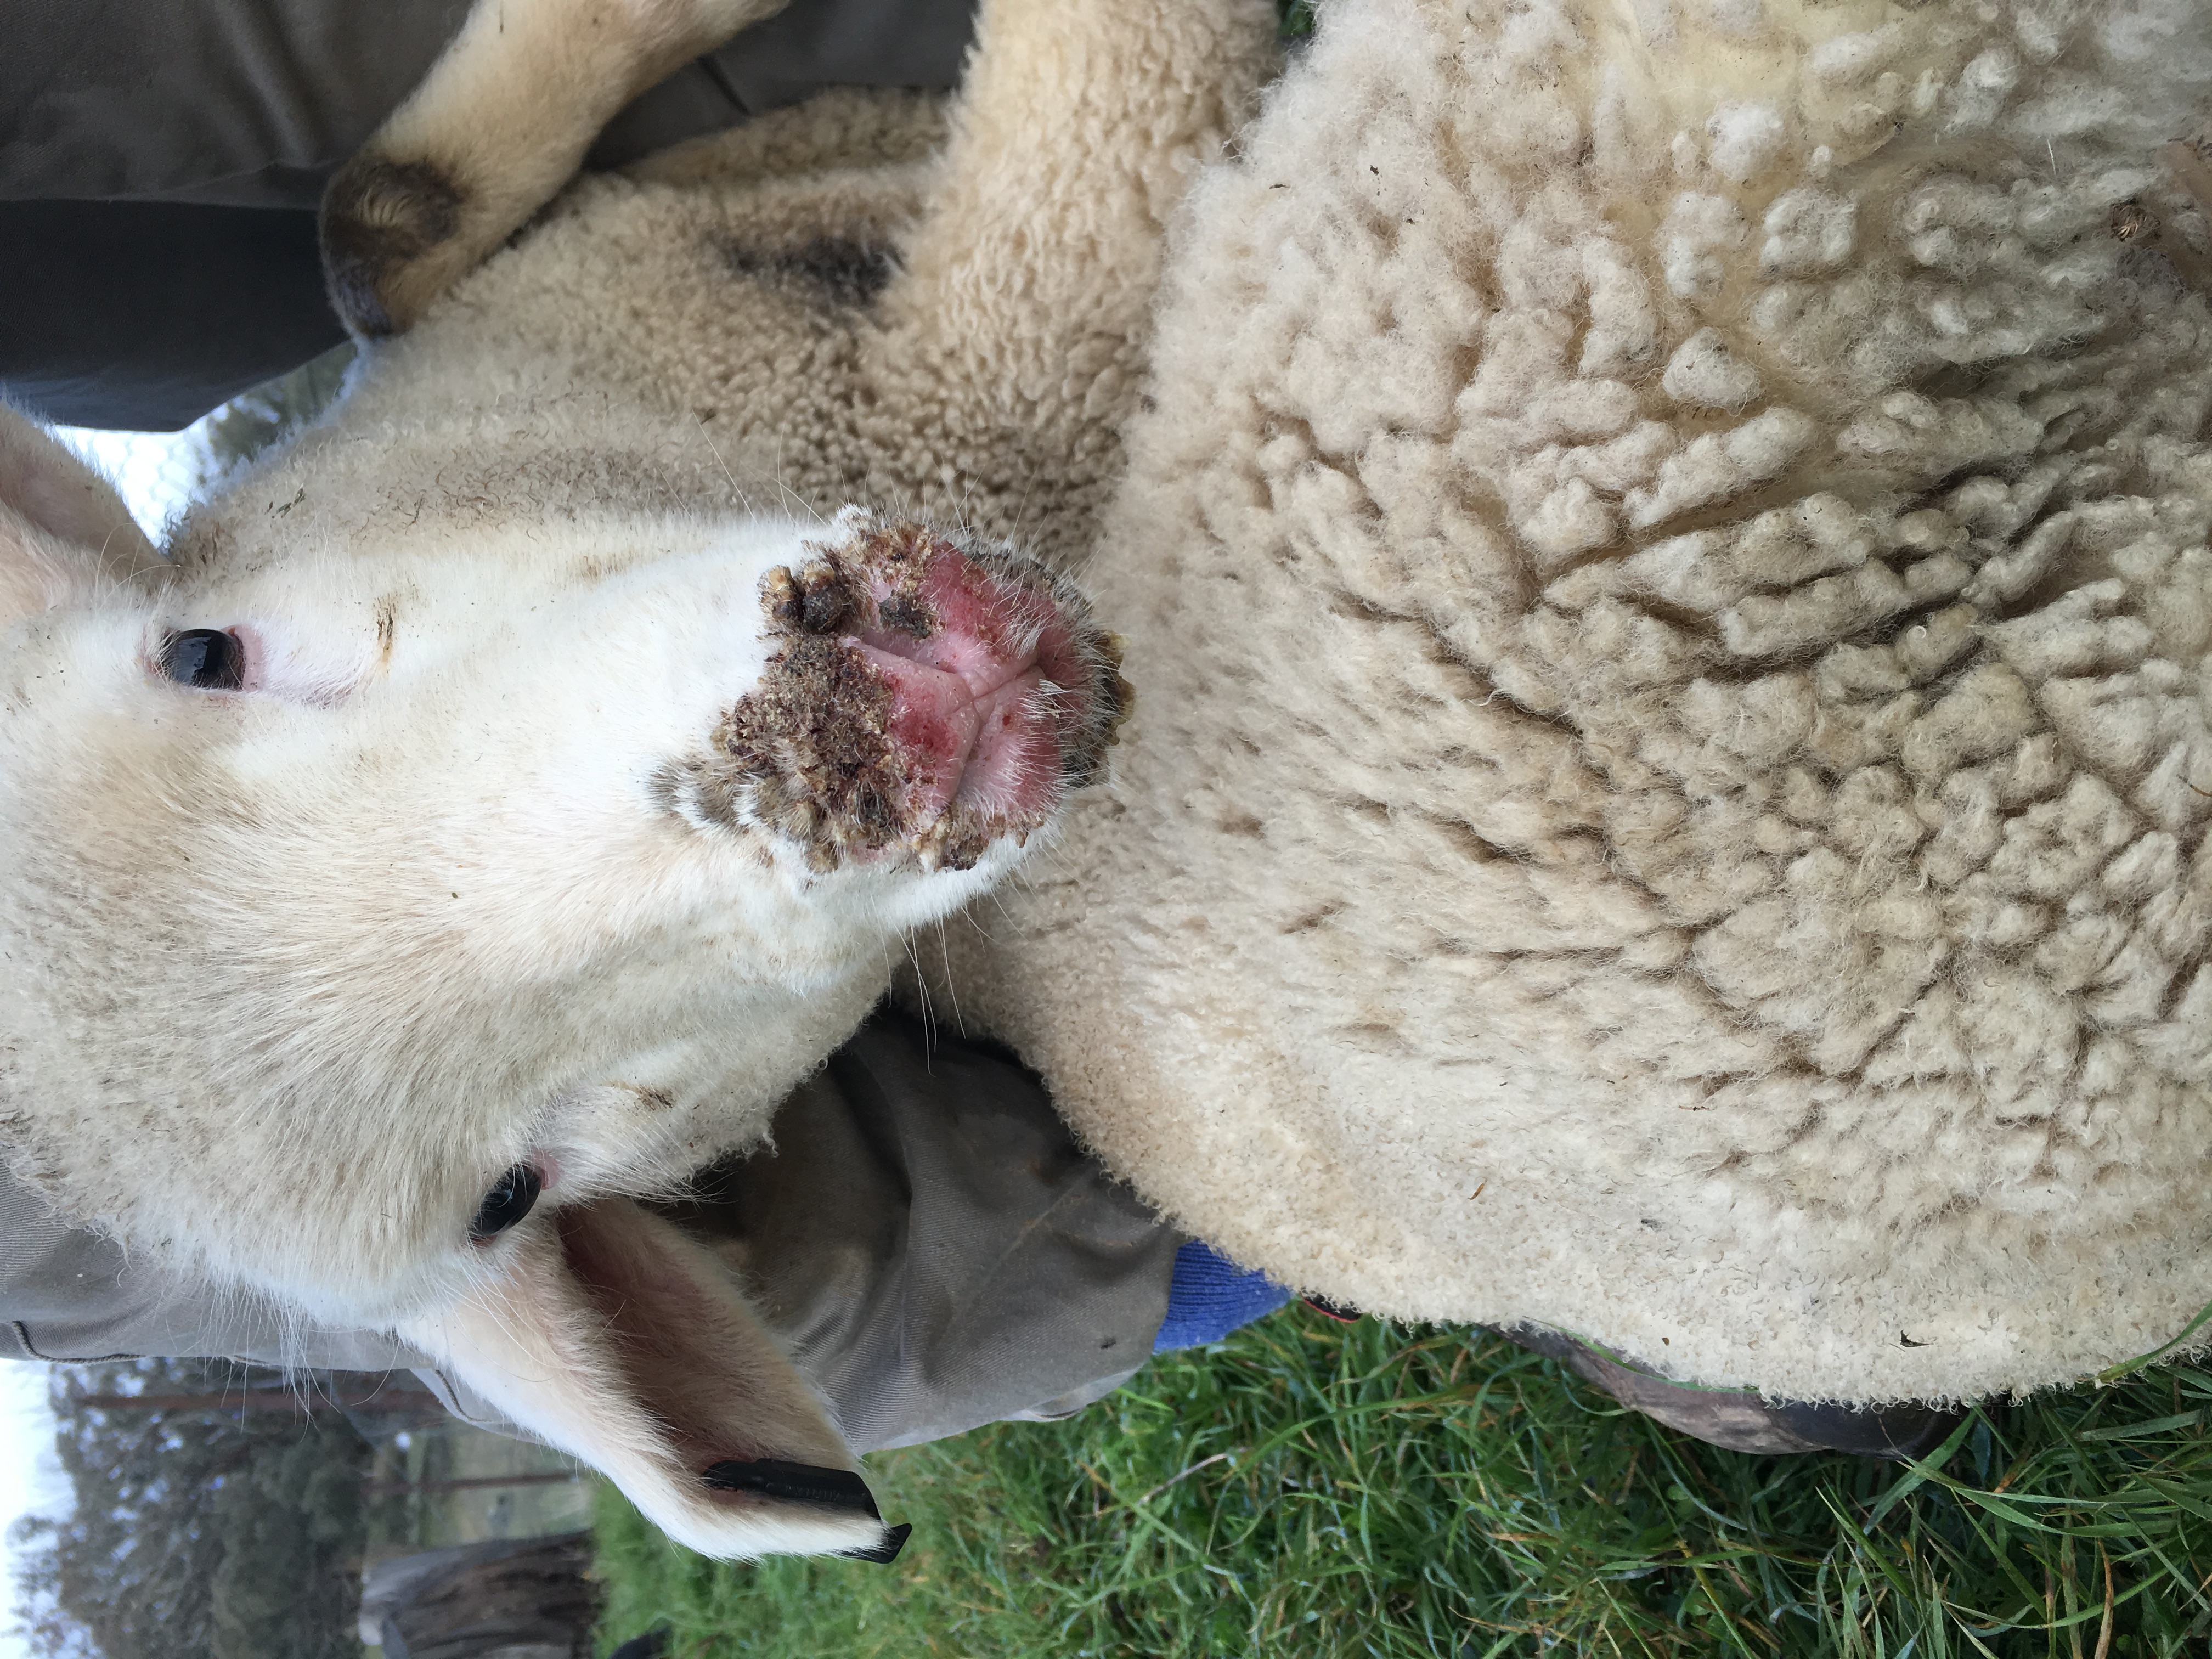 Mouth of the sheep has scabs from the infection and the nose of the sheep is red and wool has fallen out around affected area.